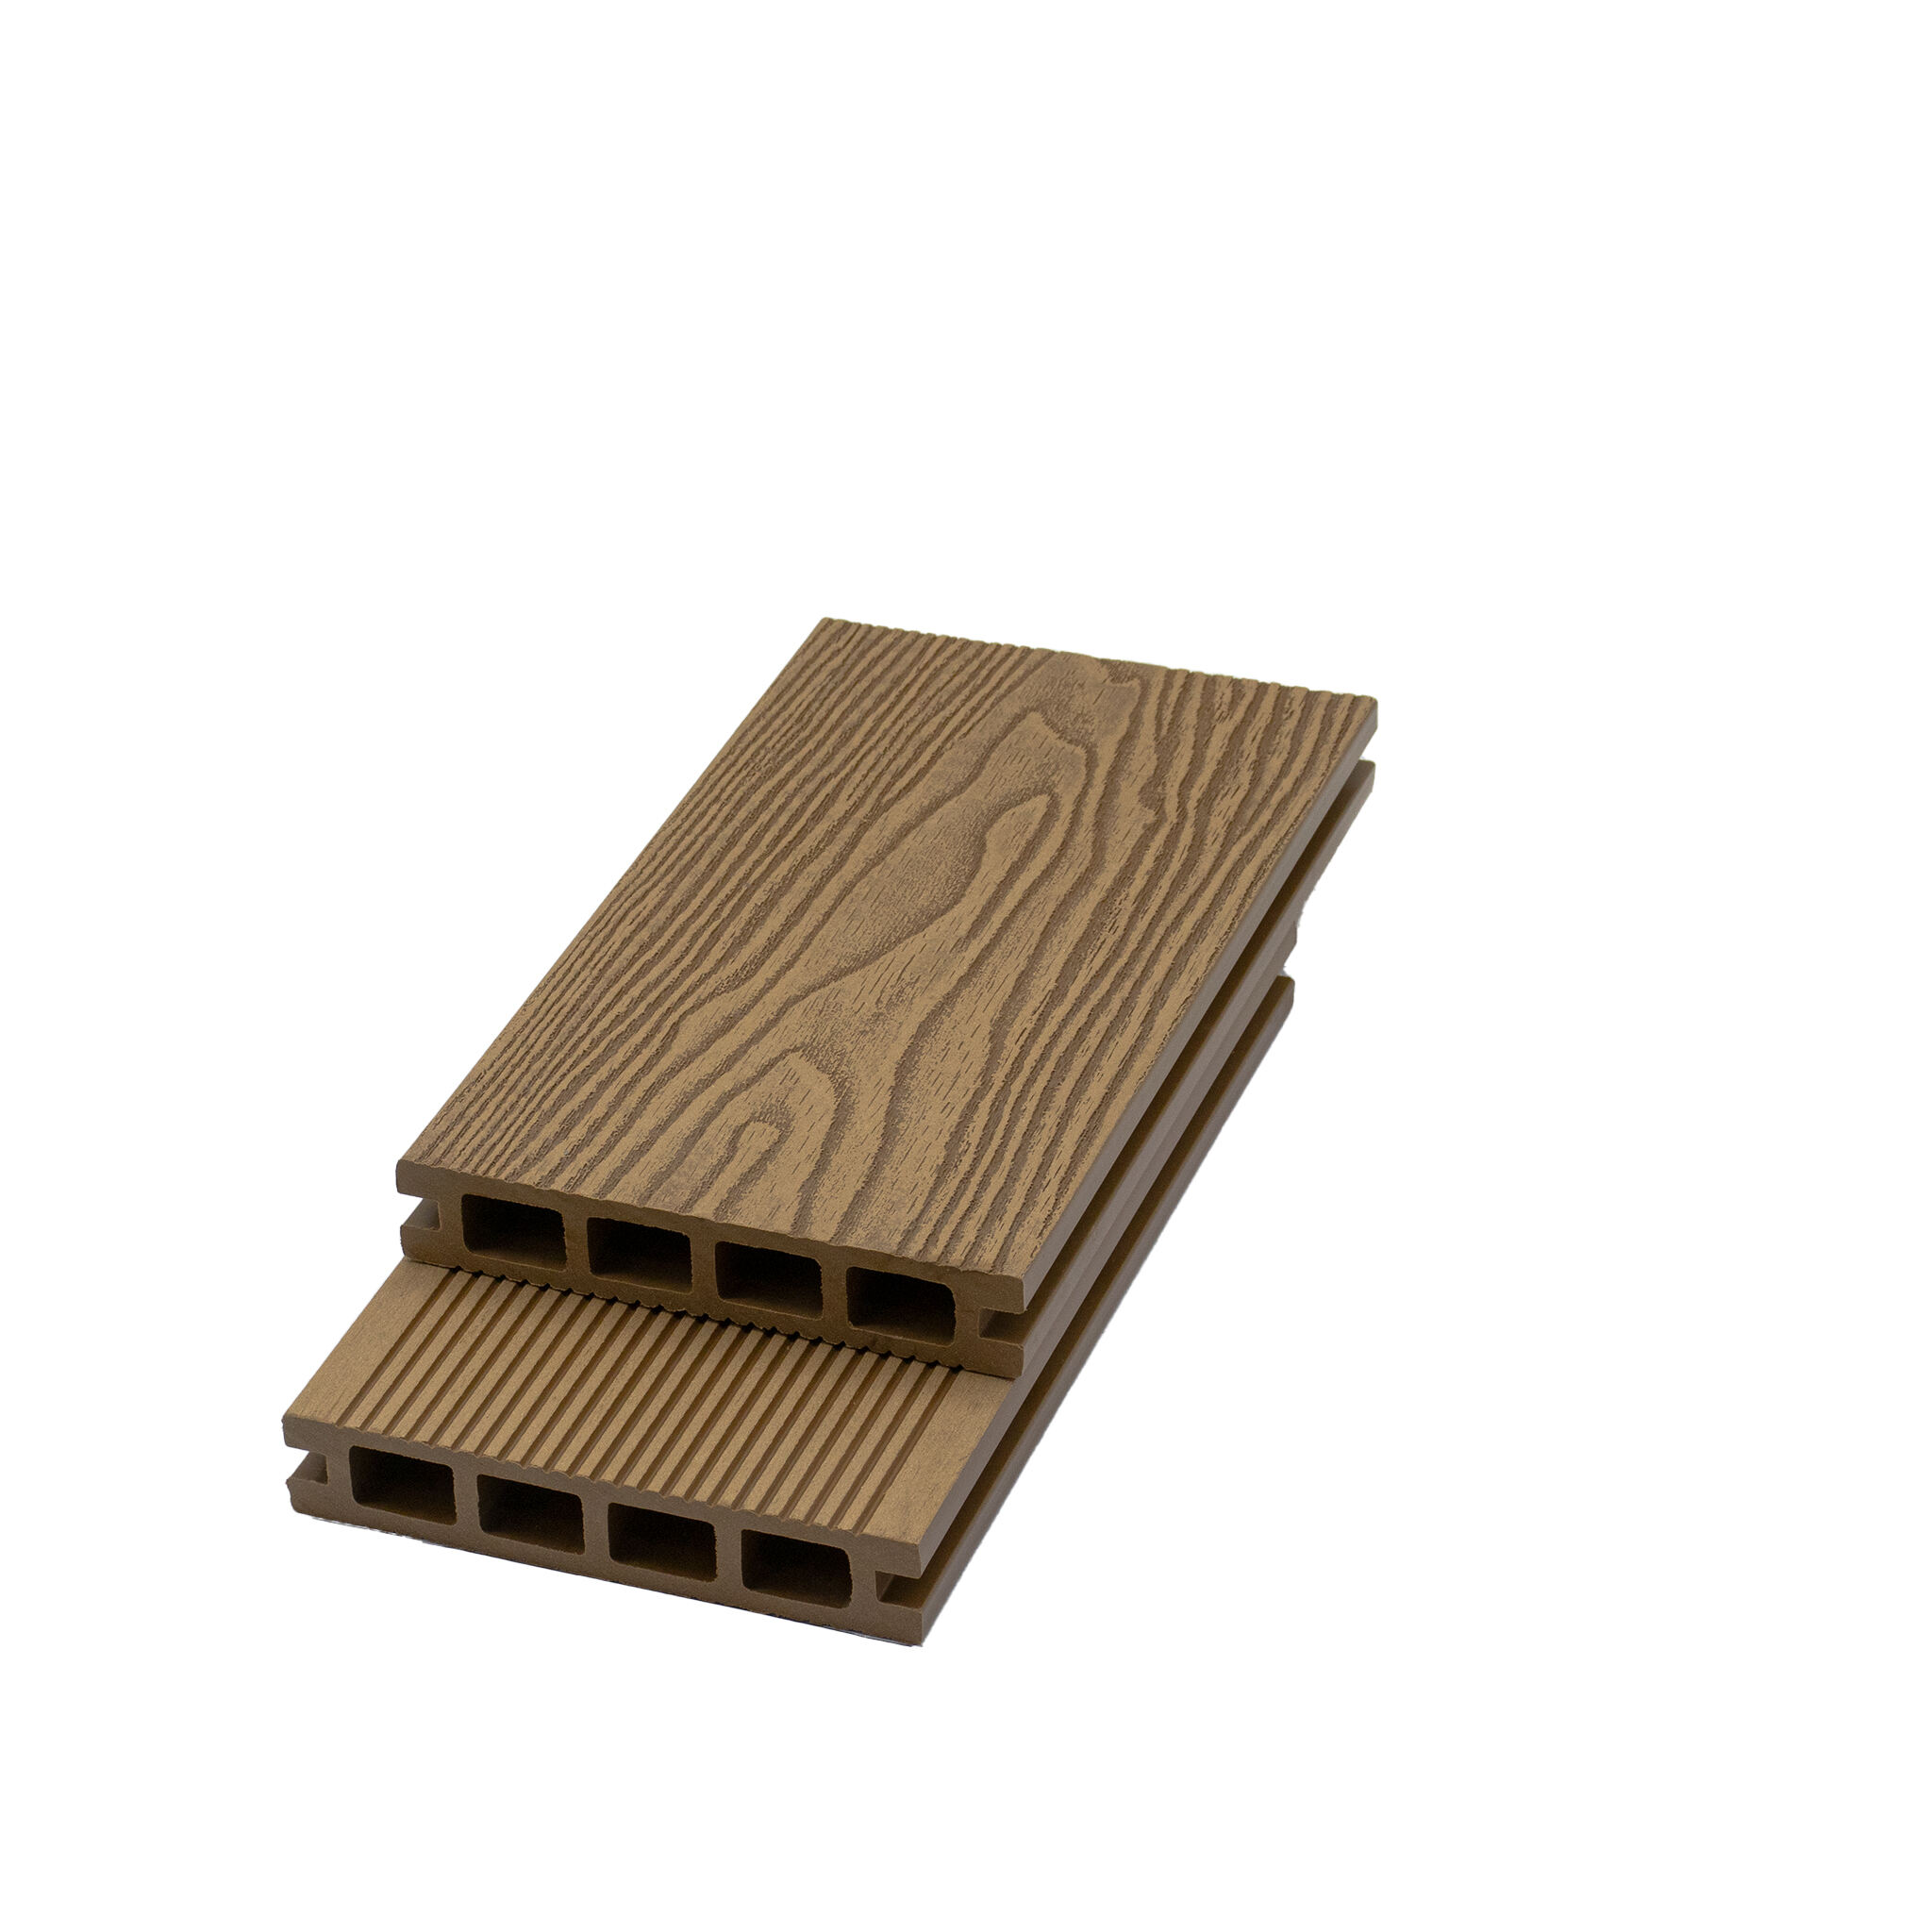 Top composite decking imported from China on Indonesia market : JFWPC from Nanjing City